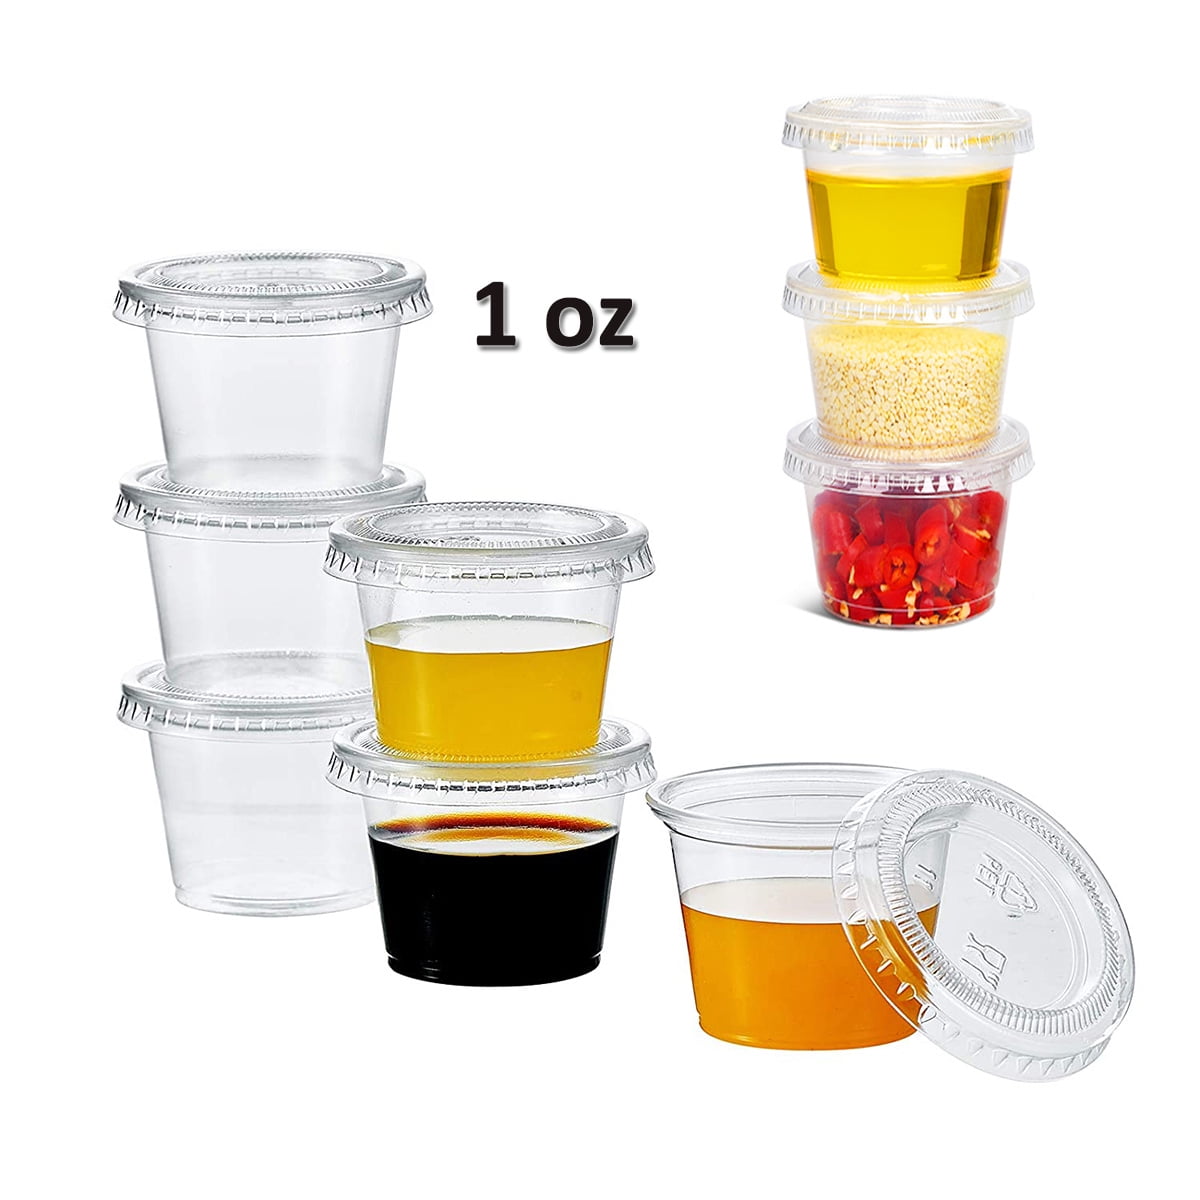 10PC Disposable Take Away Small Sauce Containers w/ Lids Clear Plastic Cups